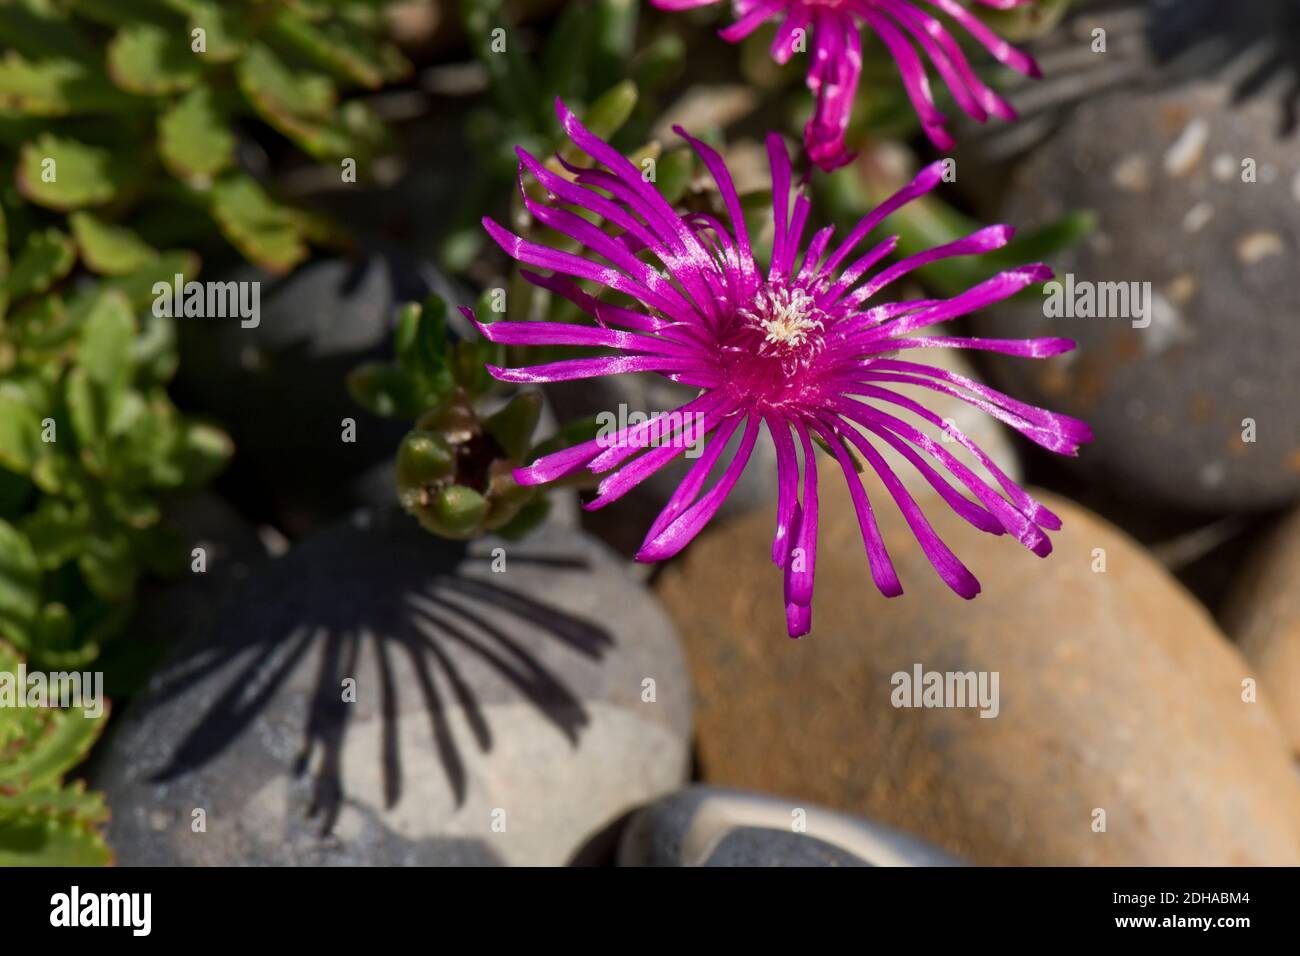 Pink ice plant or frosted ice plant (Mesembryanthemum sp.) delicate petals on an ornamental pink succulent flower, Berkshire, July Stock Photo